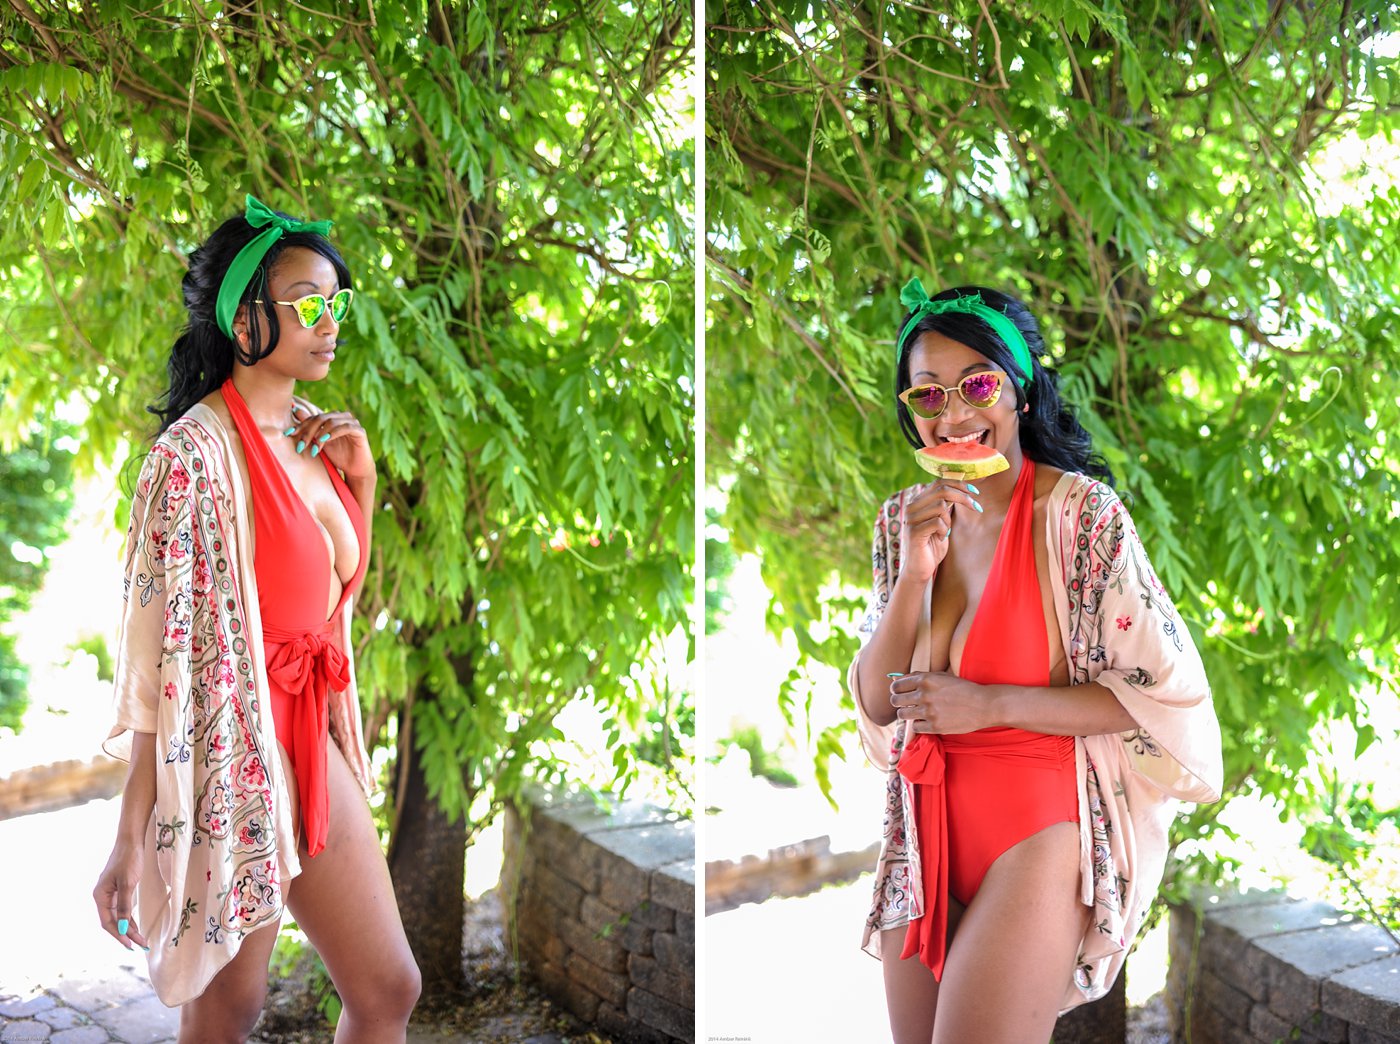 Vintage inspired bathing suit and coverup at birthday party Bandit's Ridge Louisa, Va